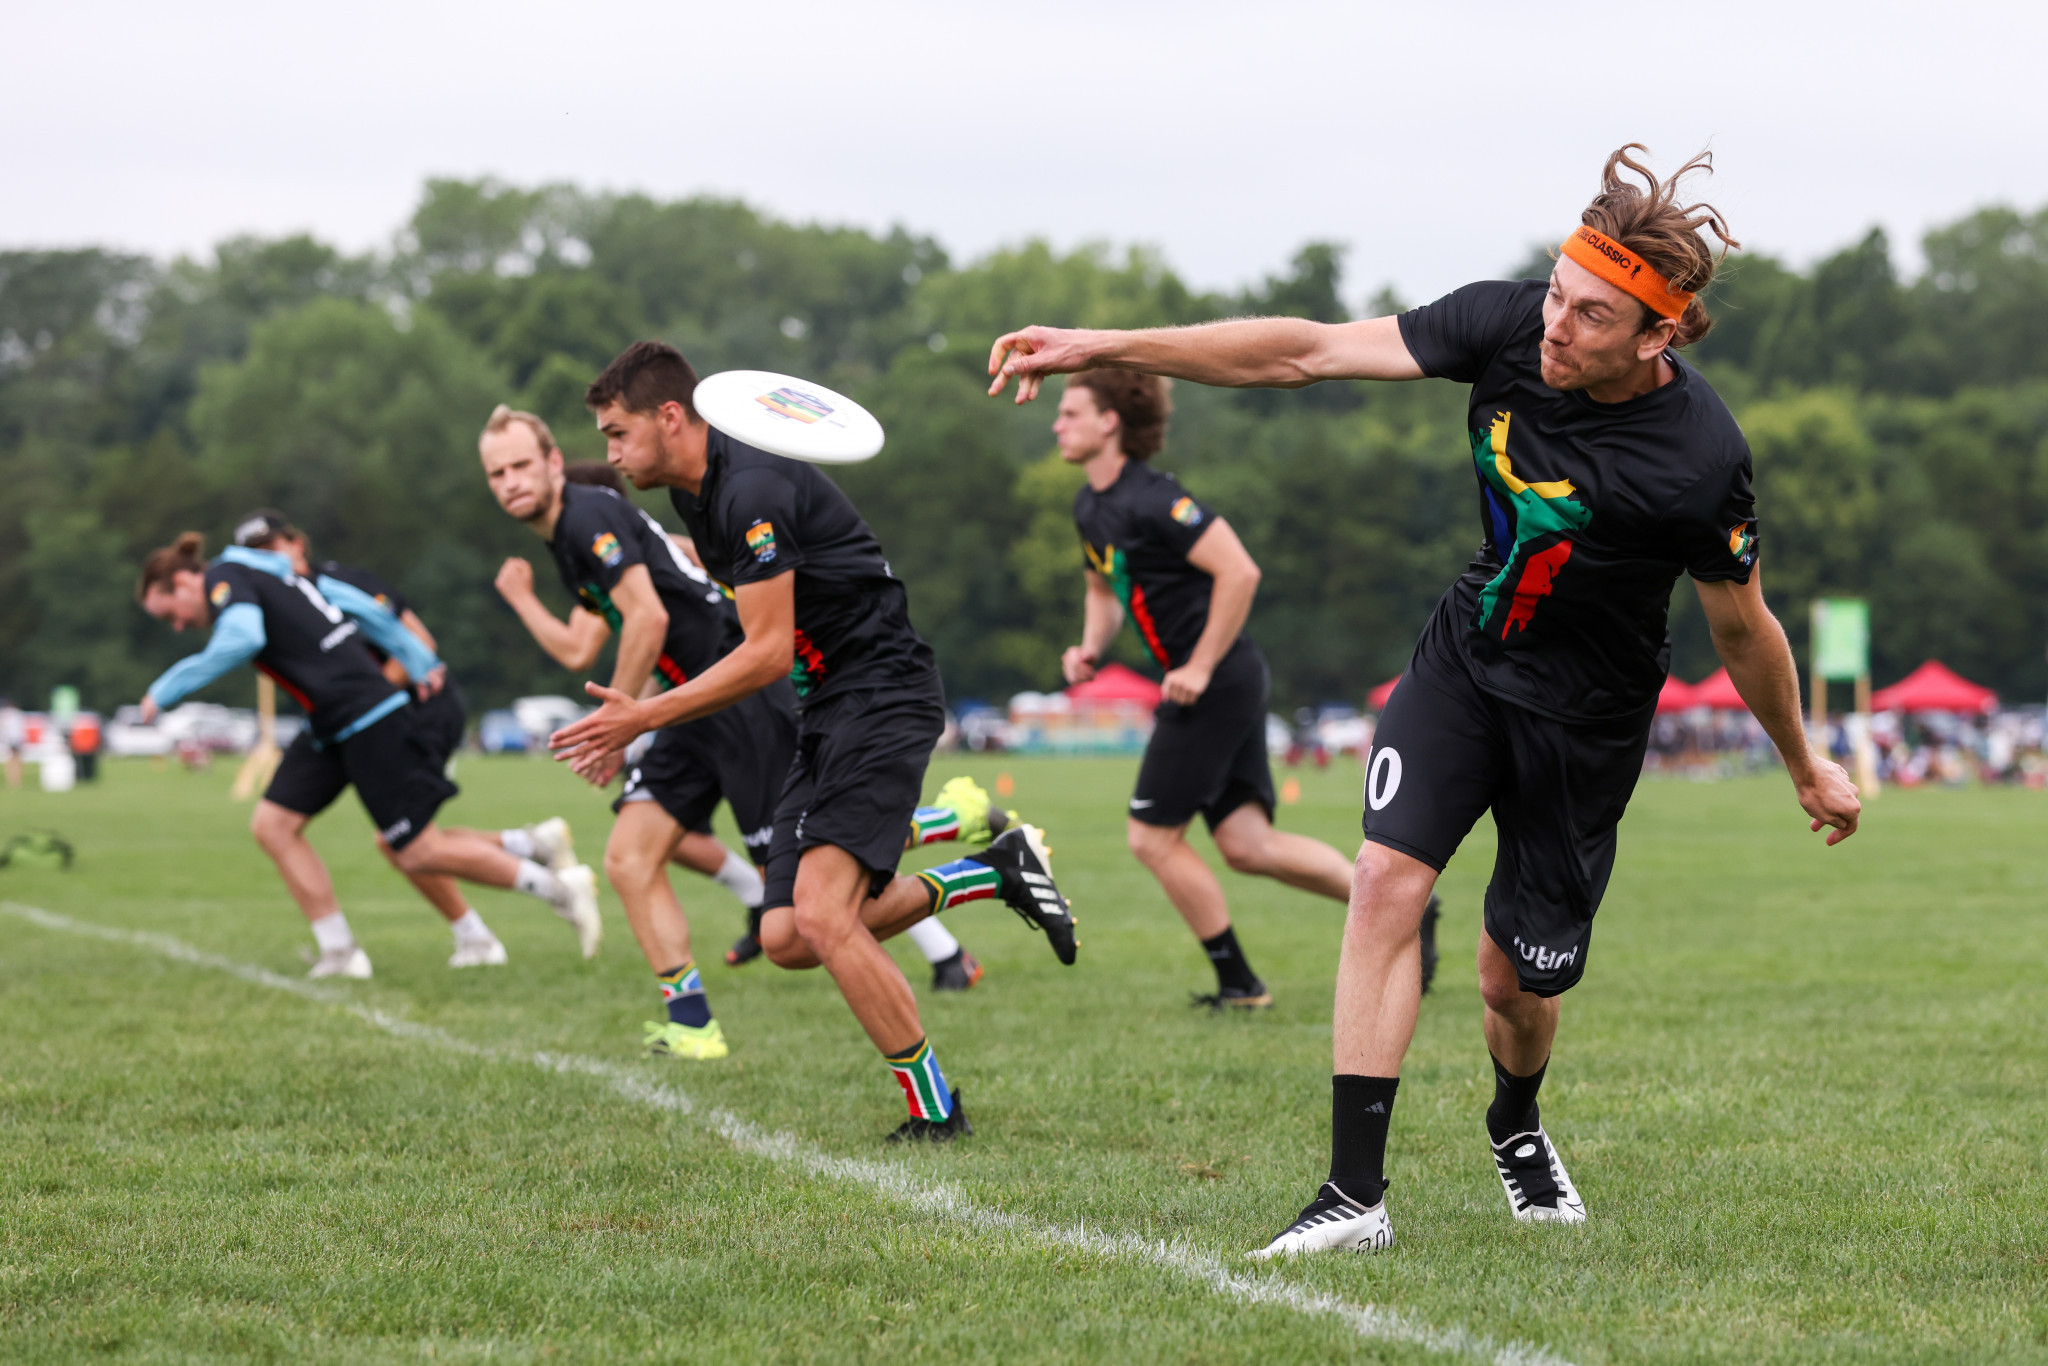 Mutiny experienced suffered a defeat and a triumph on the third day of the event © Paul Rutherford for UltiPhotos